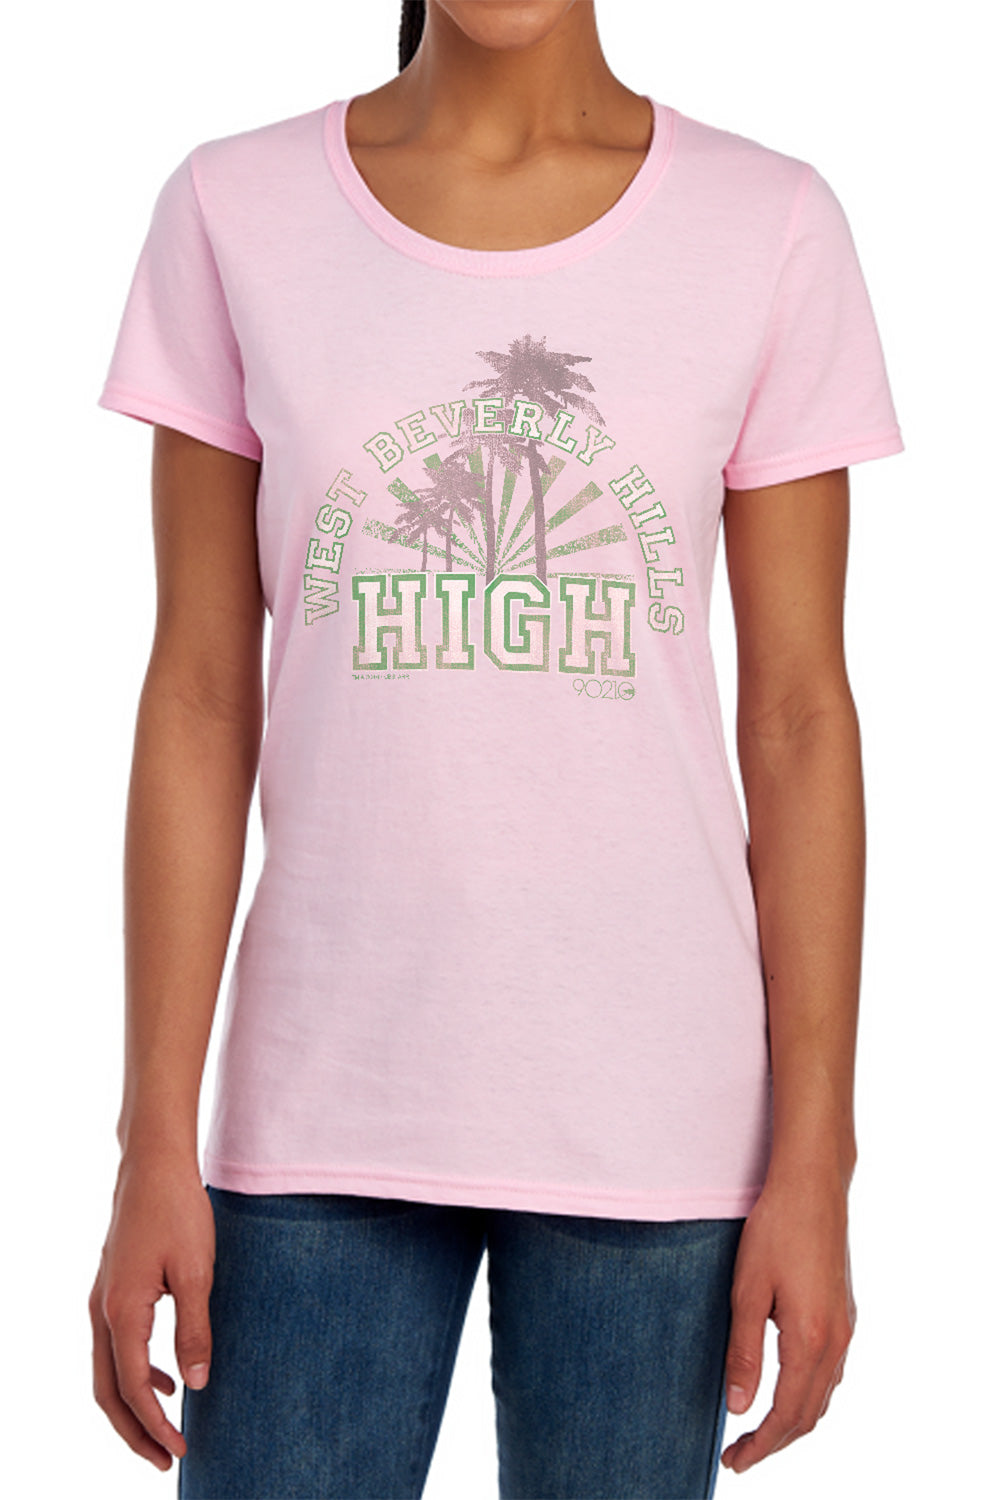 90210 : WEST BEVERLY HILLS HIGH S\S WOMENS TEE PINK LG